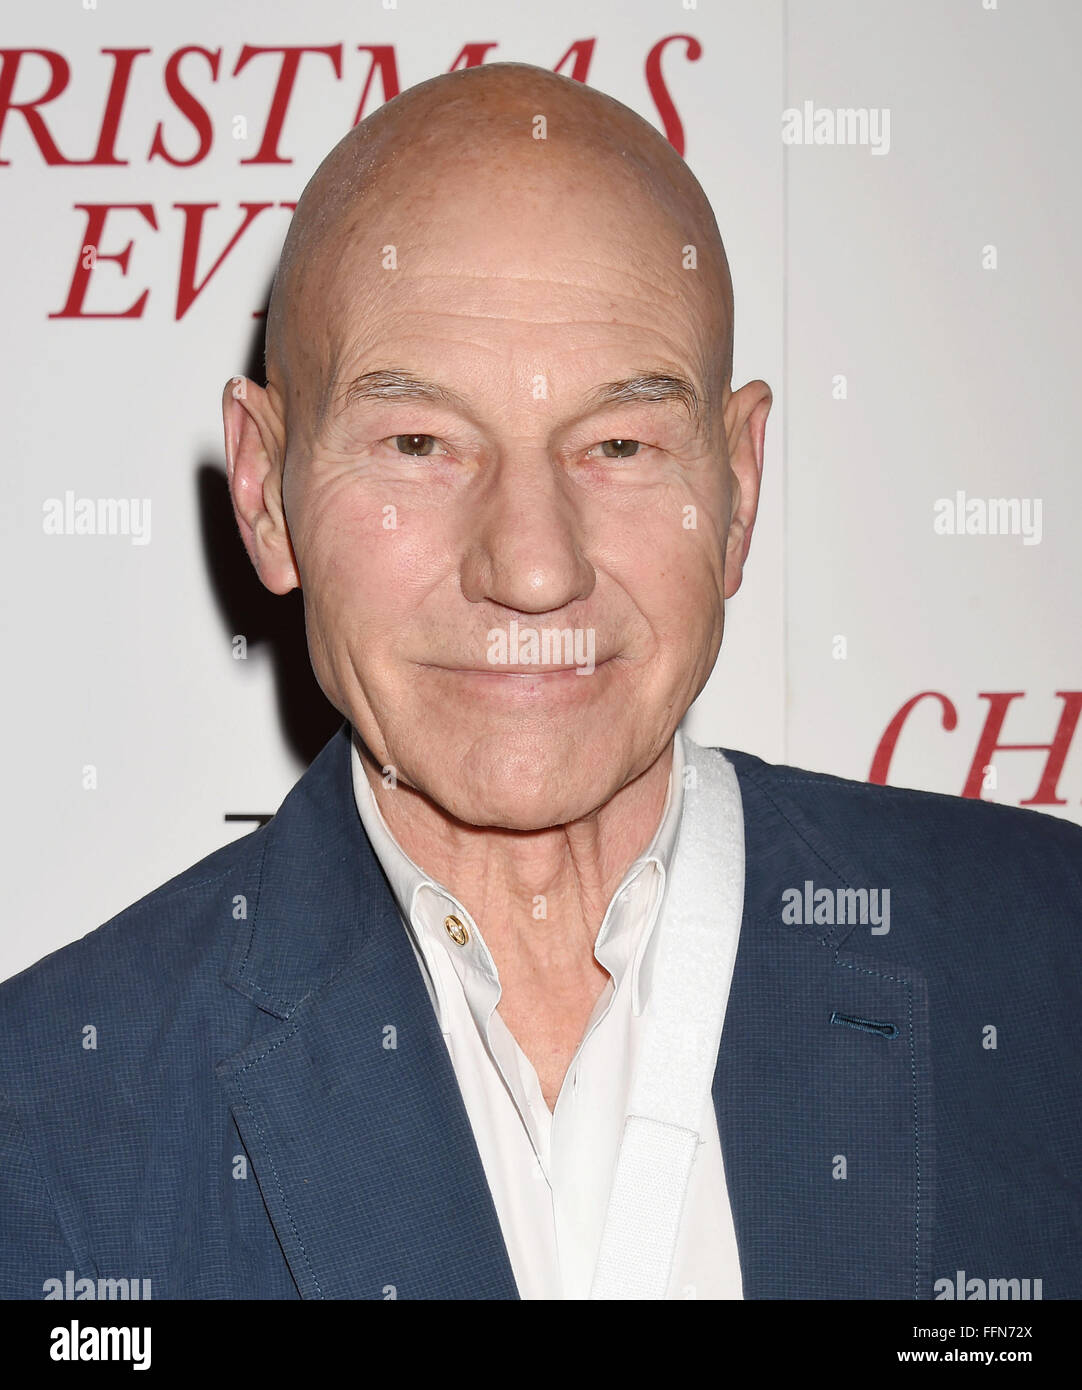 Actor Patrick Stewart arrives at the premiere of Unstuck's 'Christmas Eve' at the ArcLight Hollywood on December 2, 2015 in Hollywood, California., Stock Photo